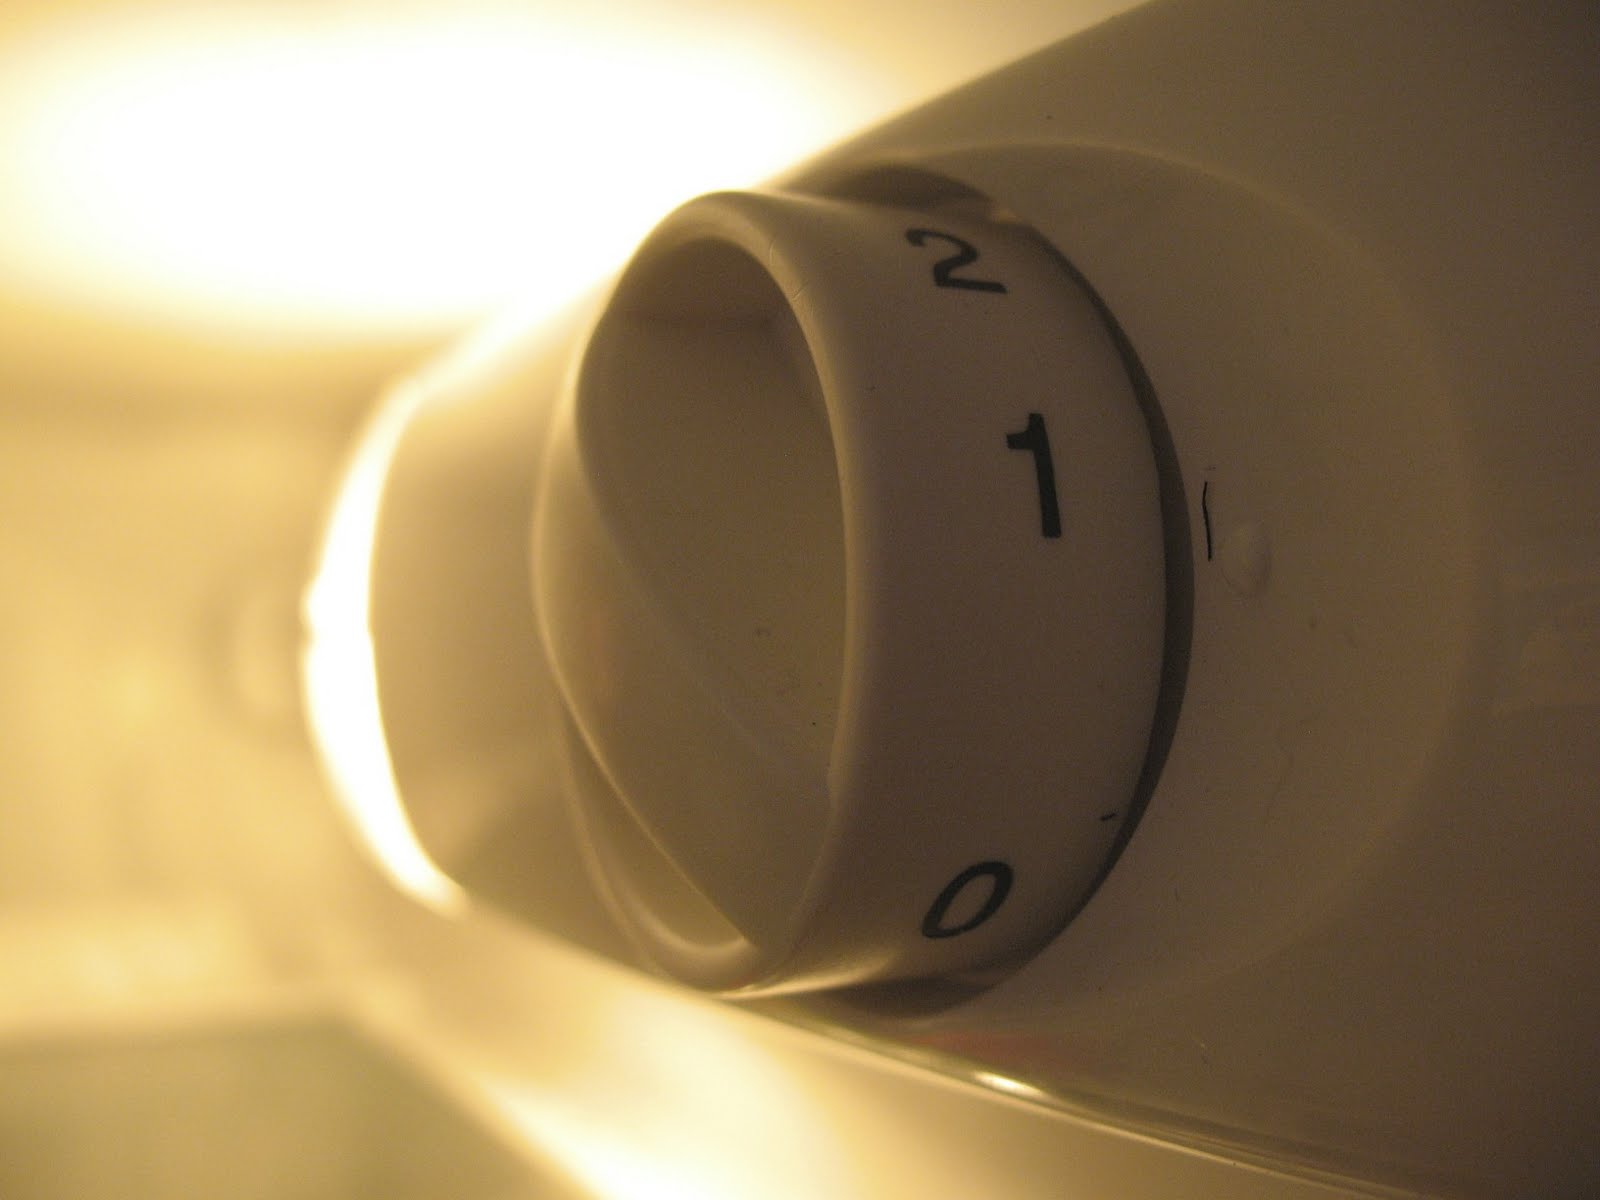 Dial on the Nordland refrigerator